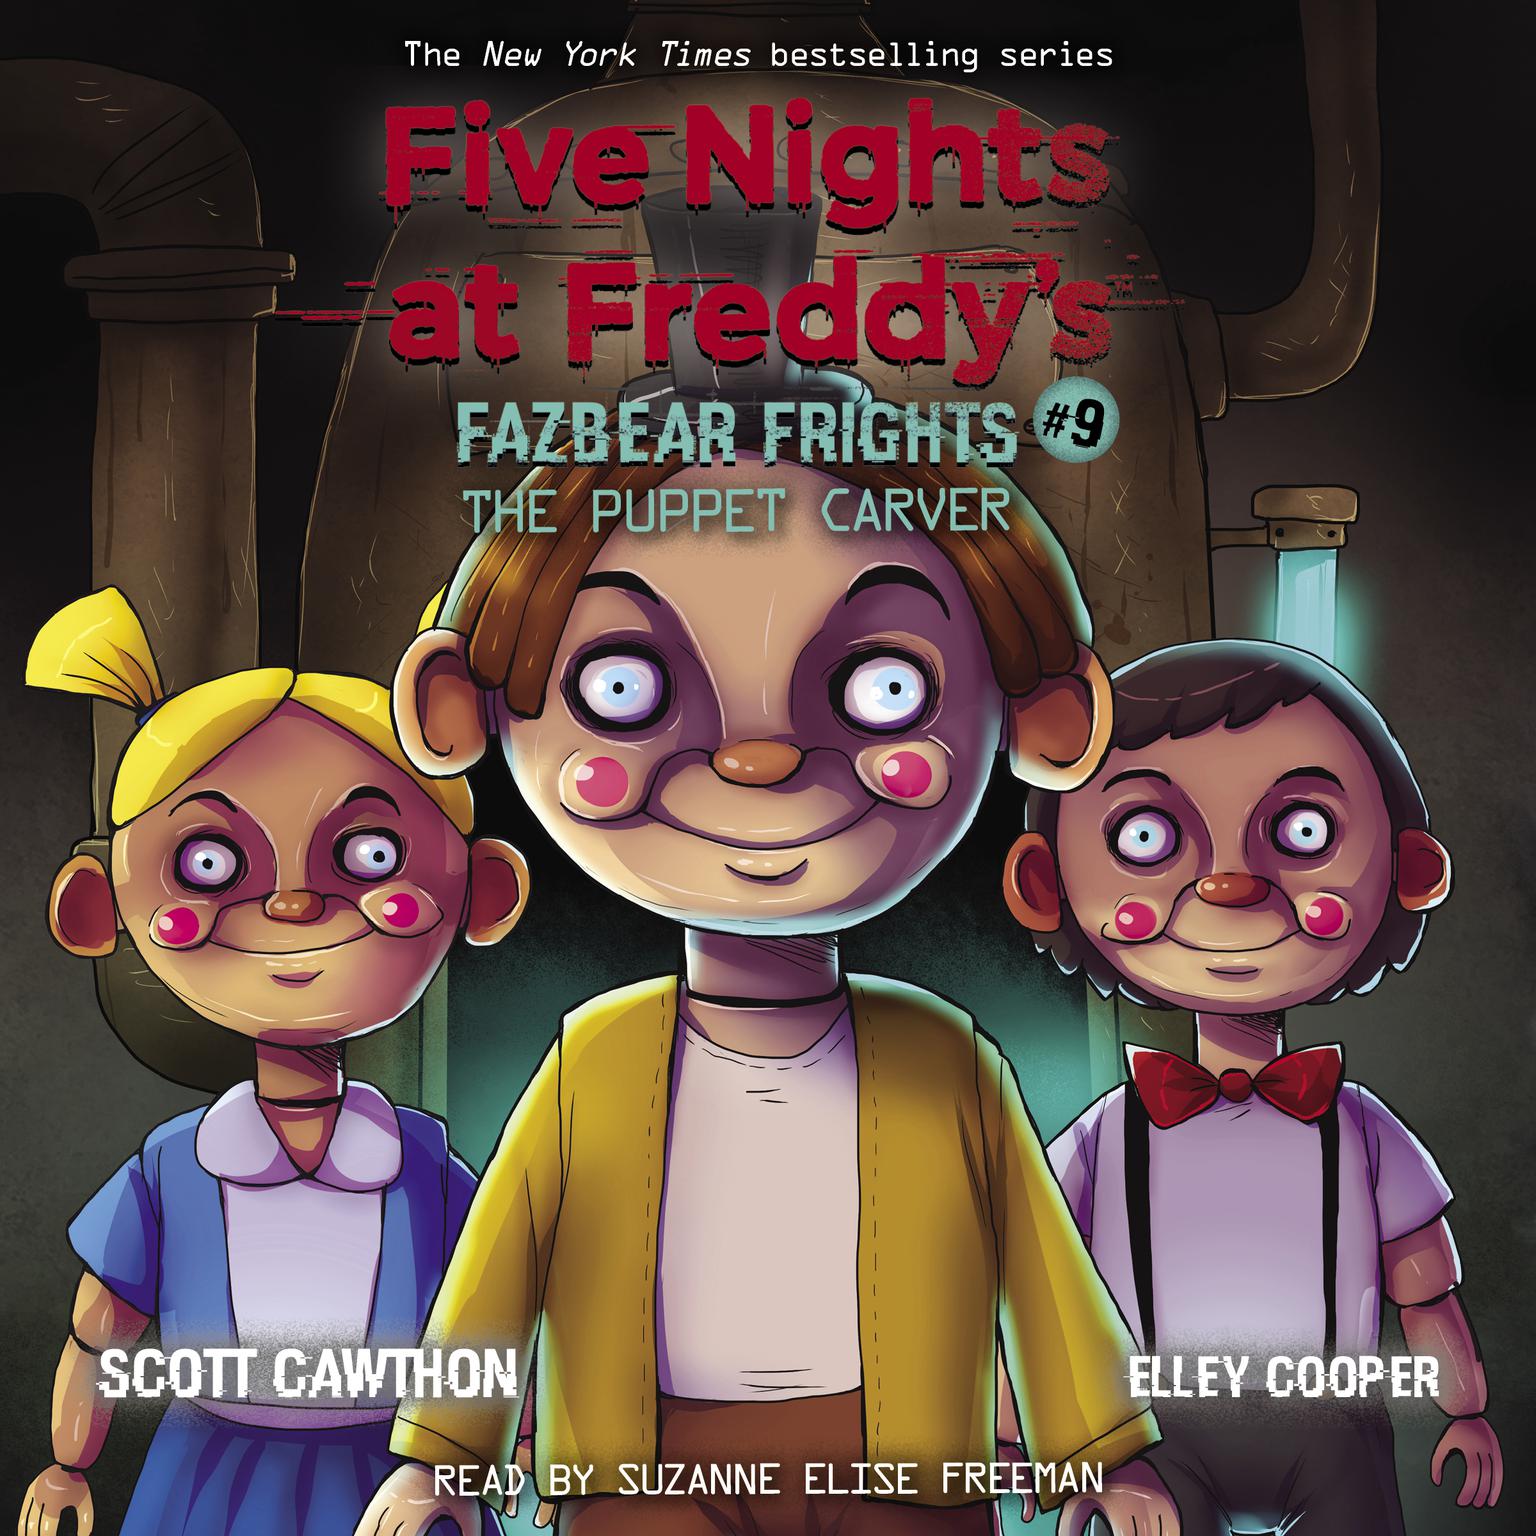 The Puppet Carver: An AFK Book (Five Nights at Freddy’s: Fazbear Frights #9) Audiobook, by Scott Cawthon